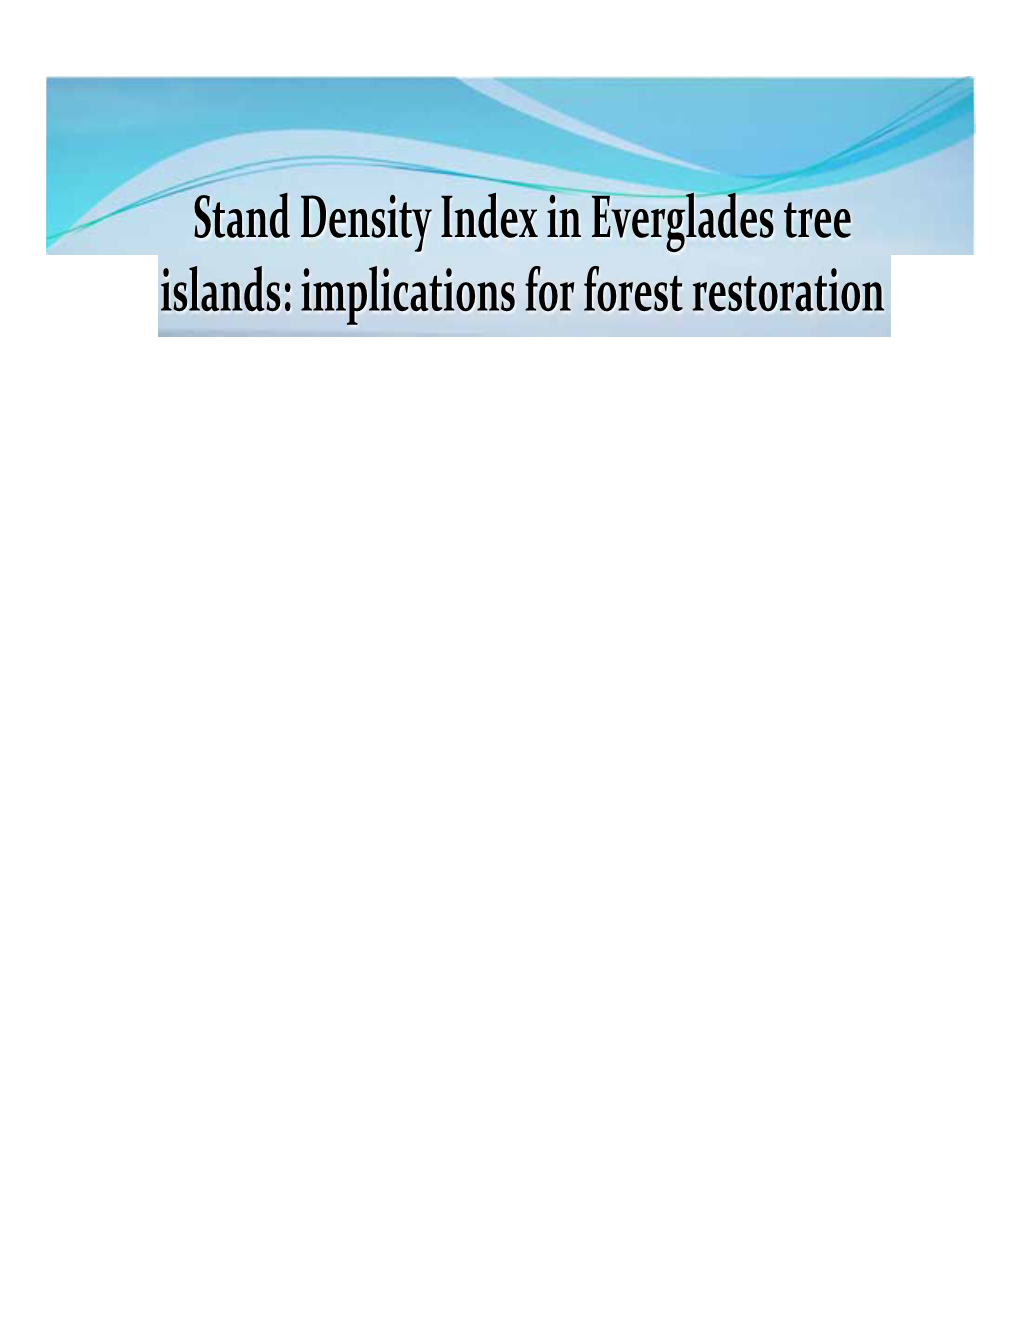 Stand Density in South Florida Tropical Forests